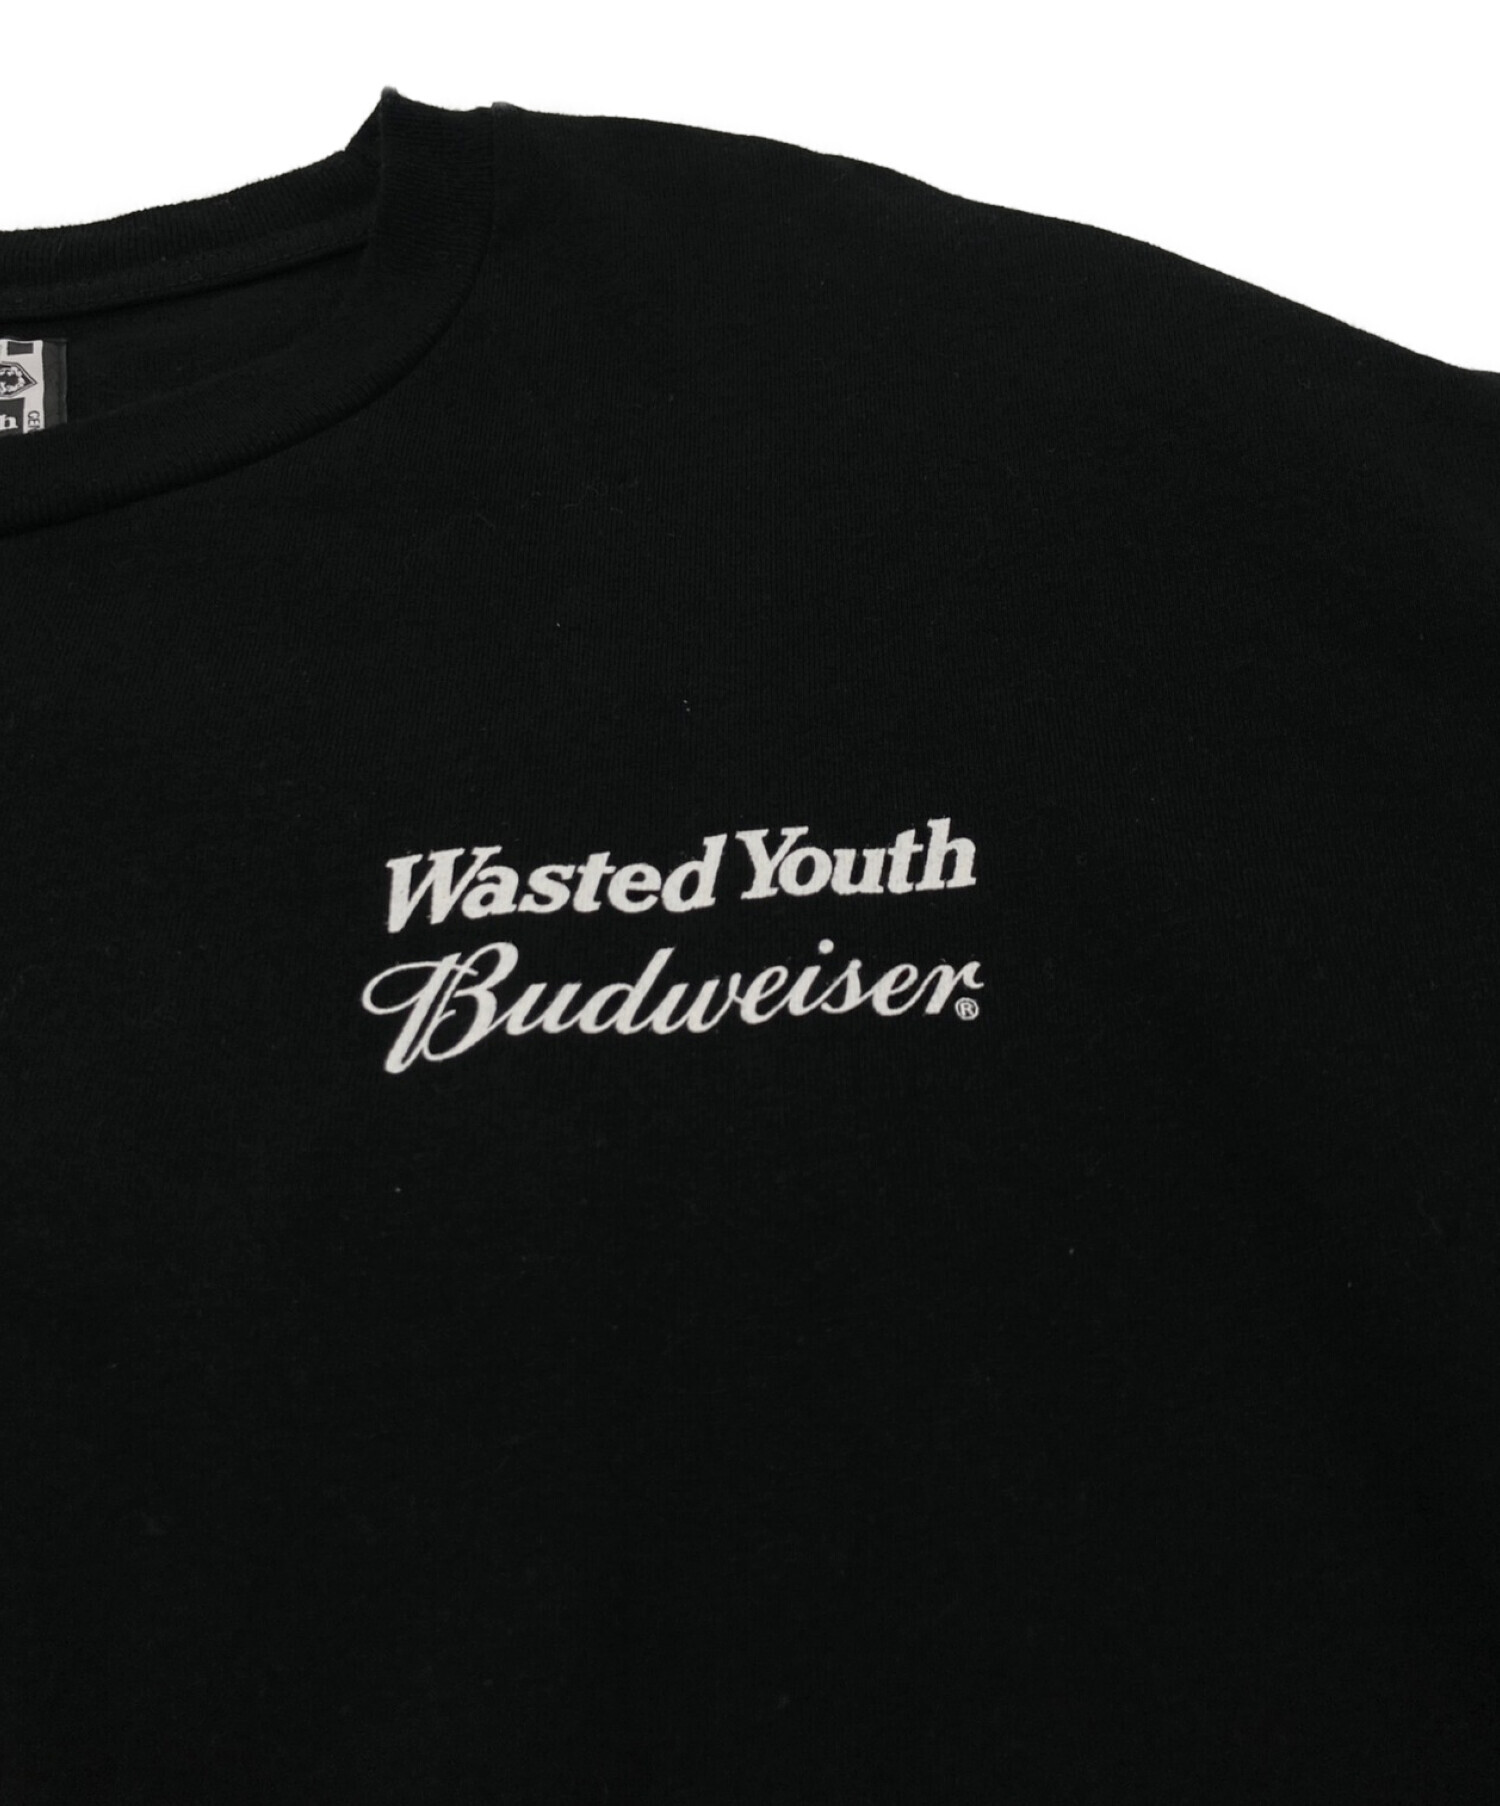 S Wasted Youth Budweiser T-SHIRT